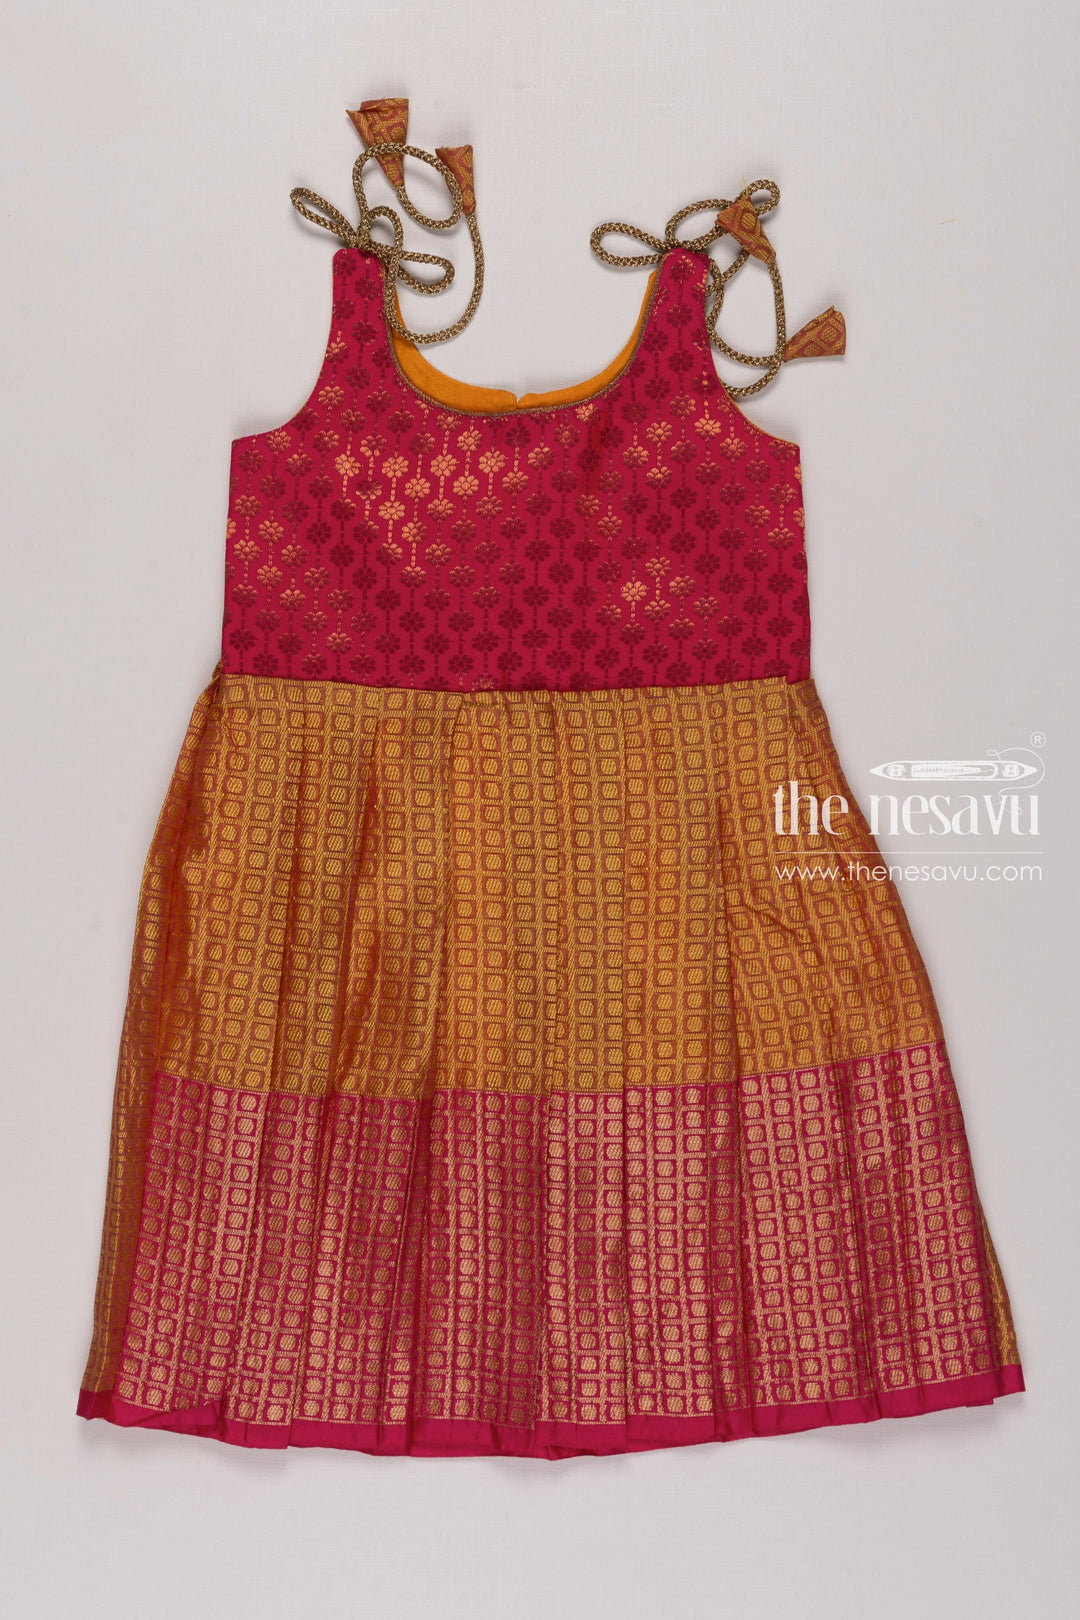 The Nesavu Tie-up Frock Pink and Yellow Silk TieUp Frock with Tassel Details Nesavu 16 (1Y) / Yellow / Blend Silk T288A-16 Vibrant Pink Yellow Tie Up Silk Dress | Festive Silk Frock with Tassels | The Nesavu